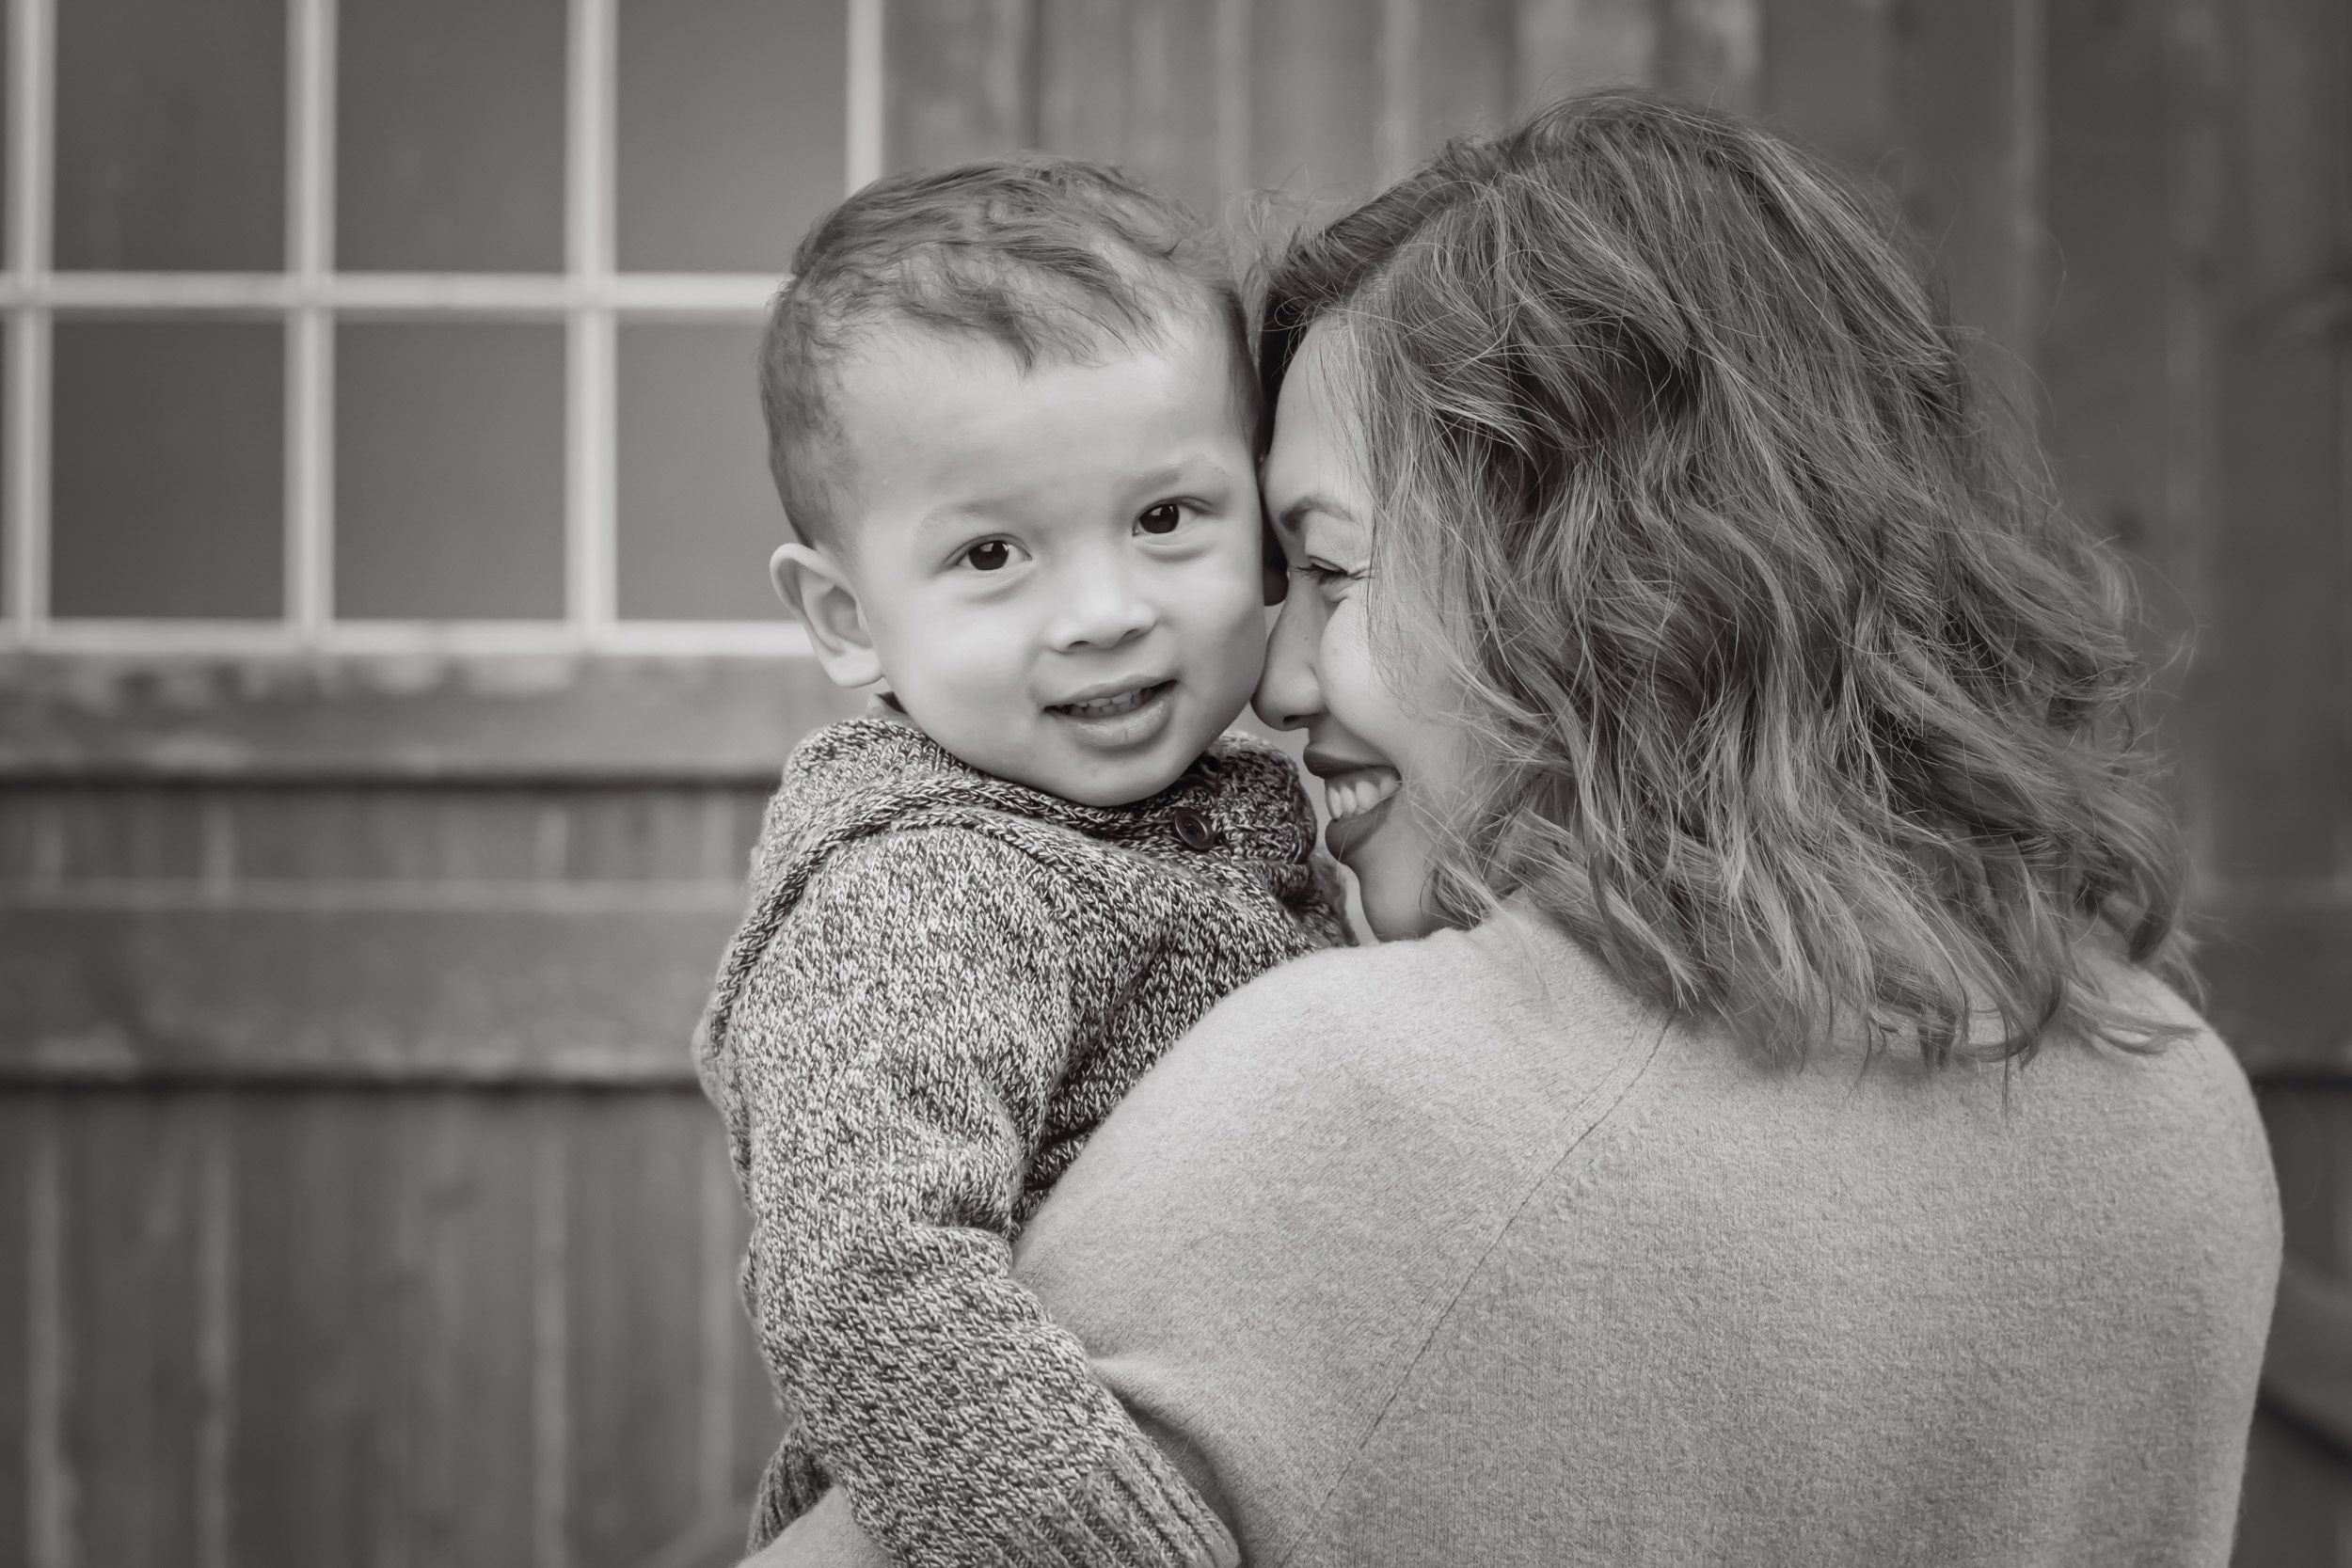 A black and white image of a little boy looking over his mom's shoulder at the camera while his mom rests her nose against his cheek and smiles at him during a family photoshoot